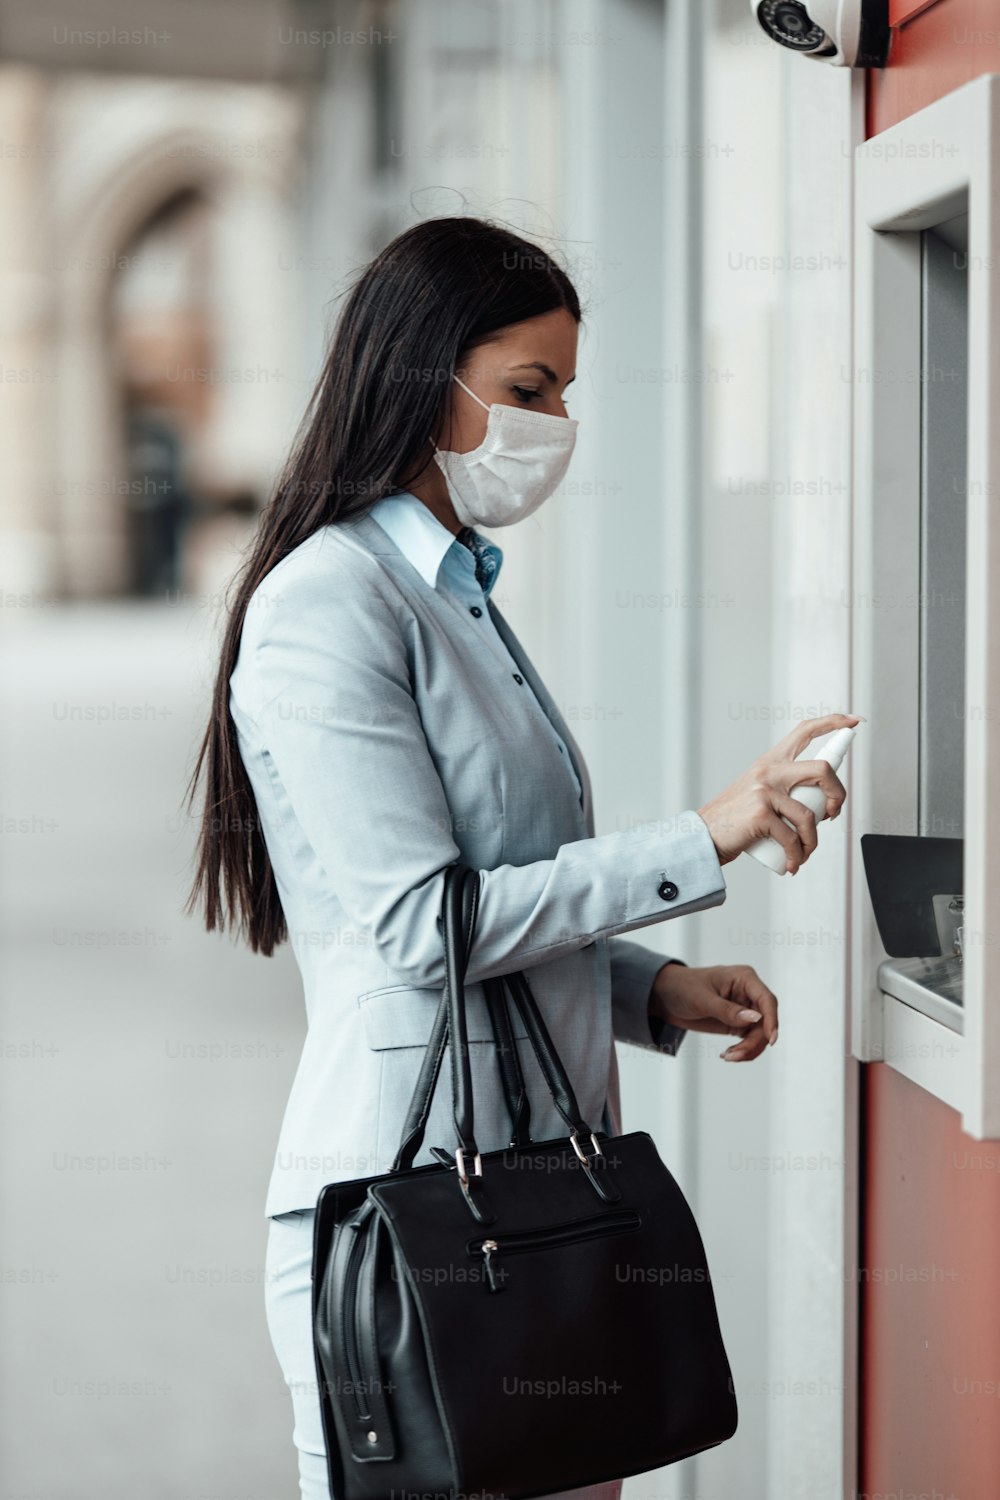 Elegant business woman with protective mask standing on city street and using alcohol spray to disinfect her hands after use of ATM machine. Corona or Covid-19 virus pandemic prevention and healthcare concept.